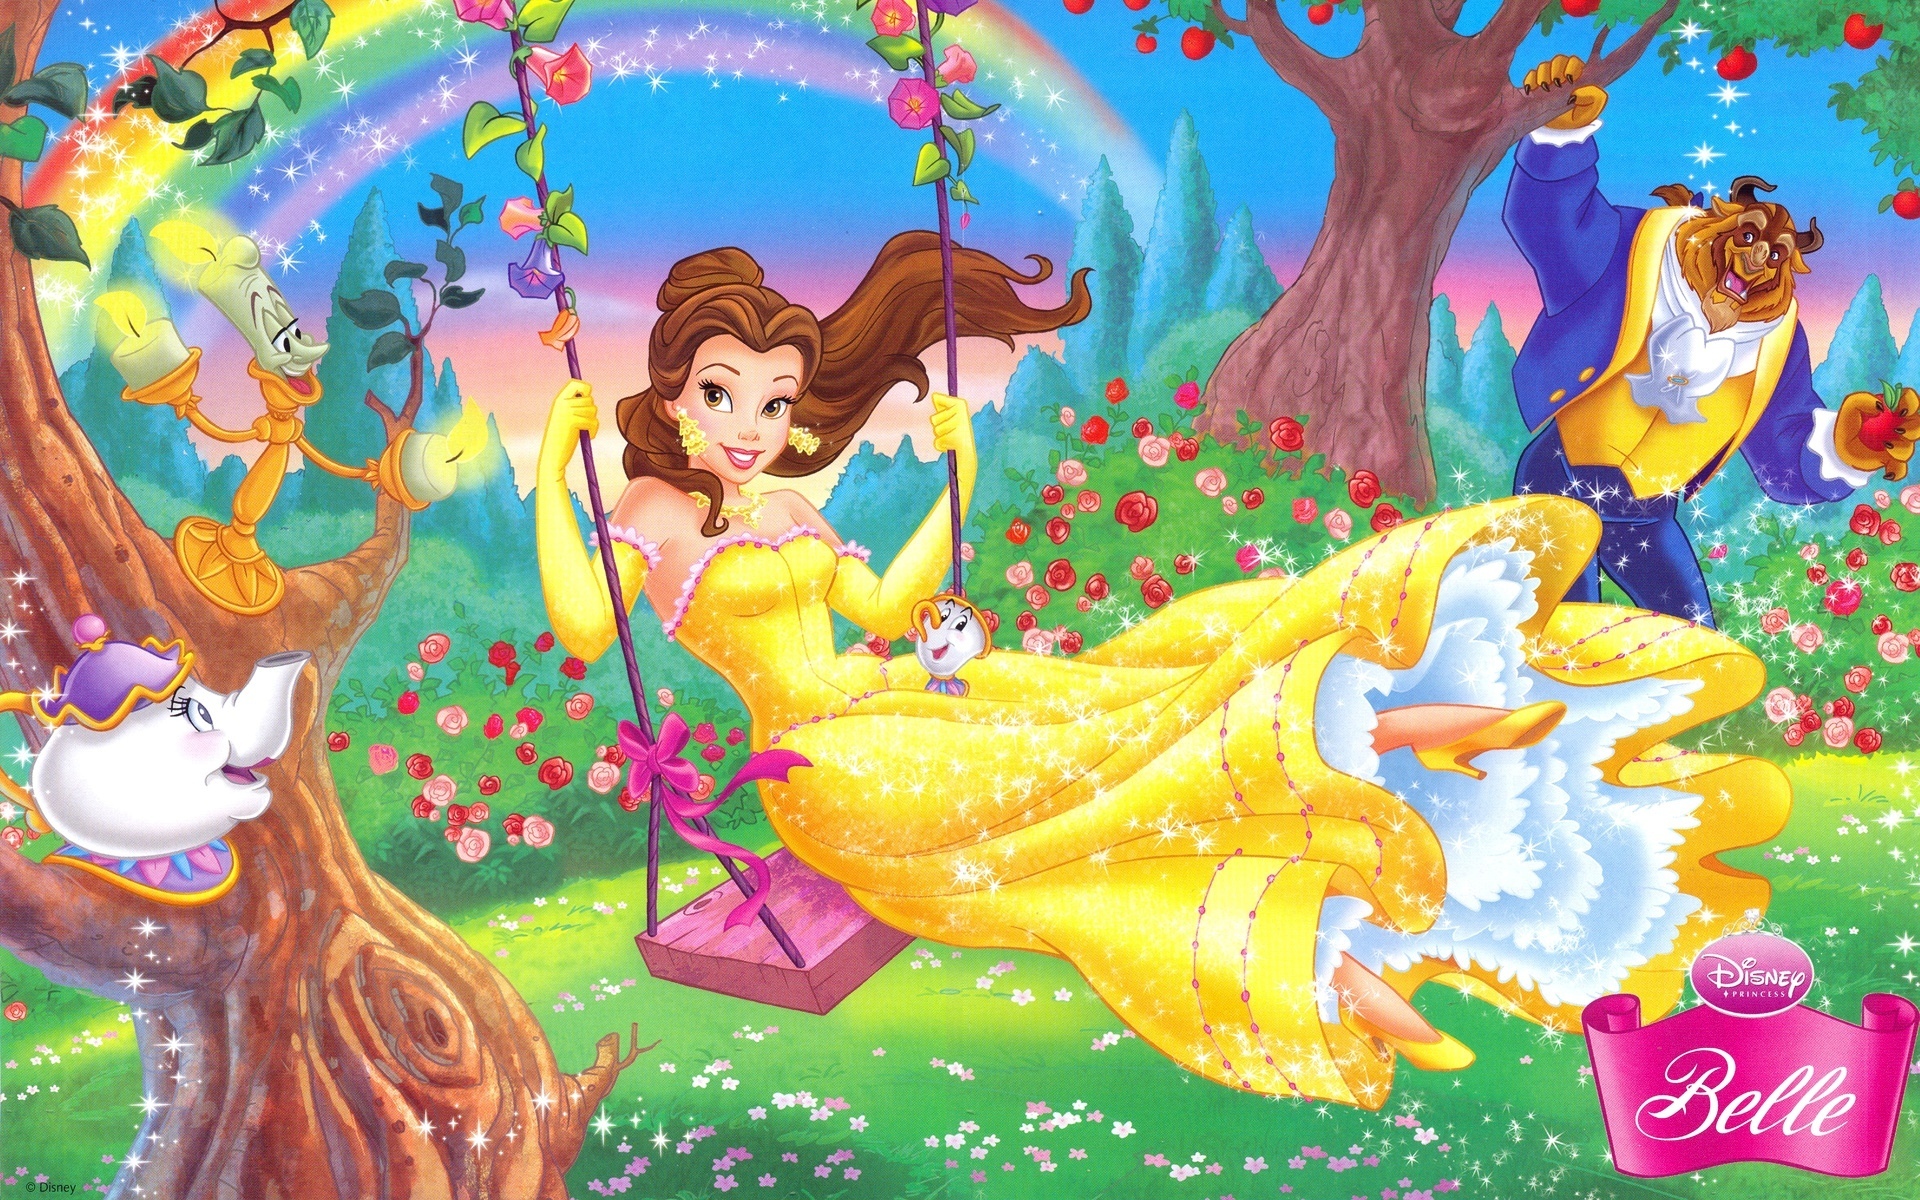 Belle And Beast Disney Couples Wallpaper